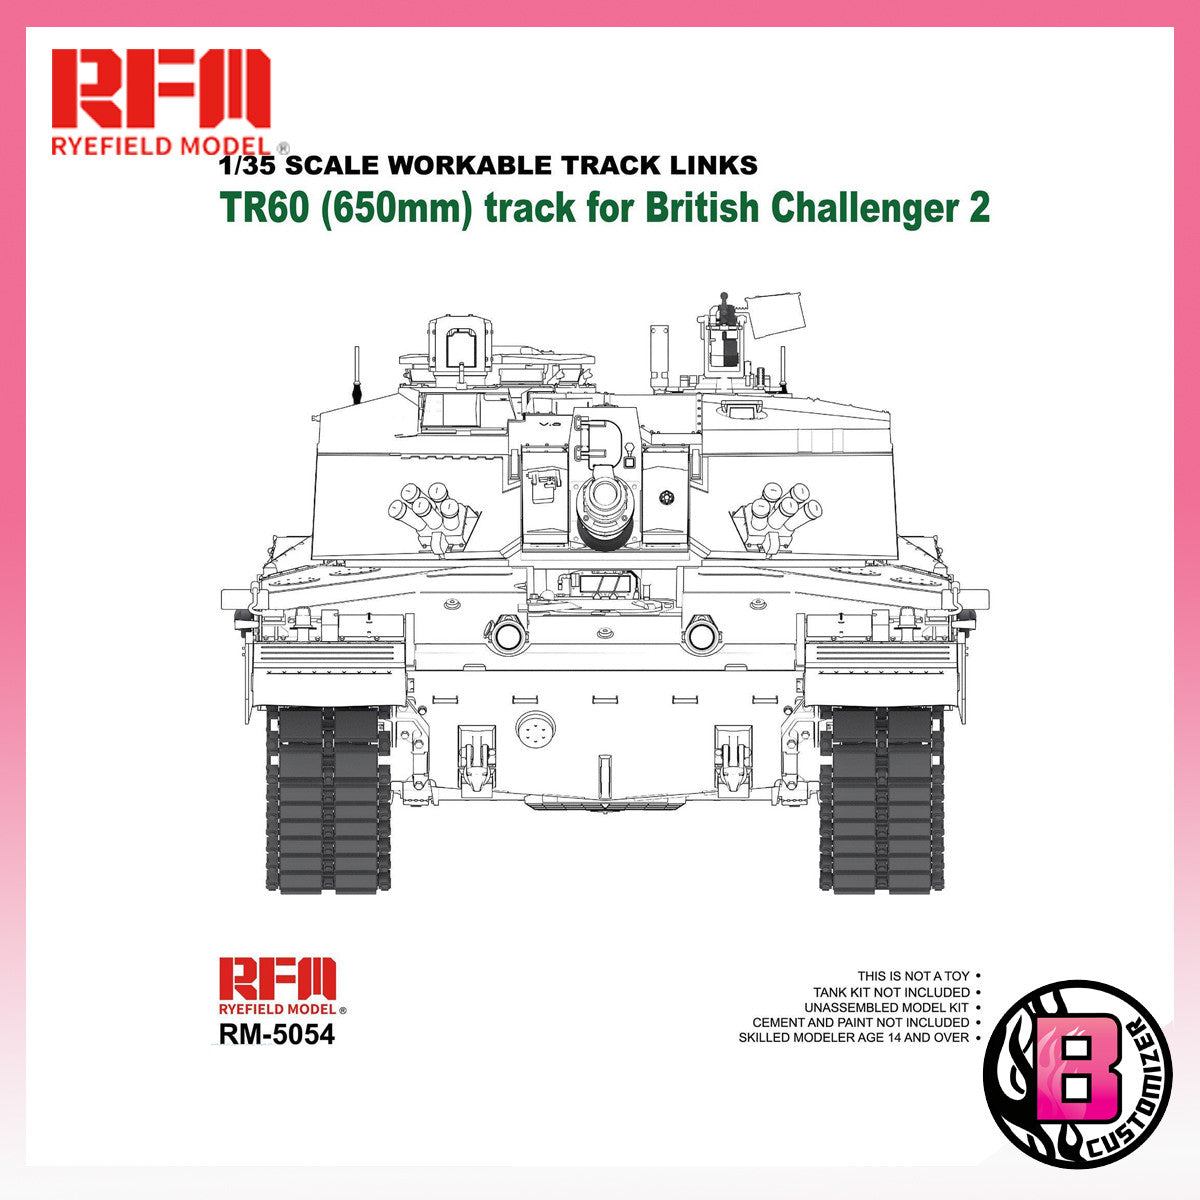 Ryefield Model (RM-5054) 1/35 workable track links for British Challenger 2